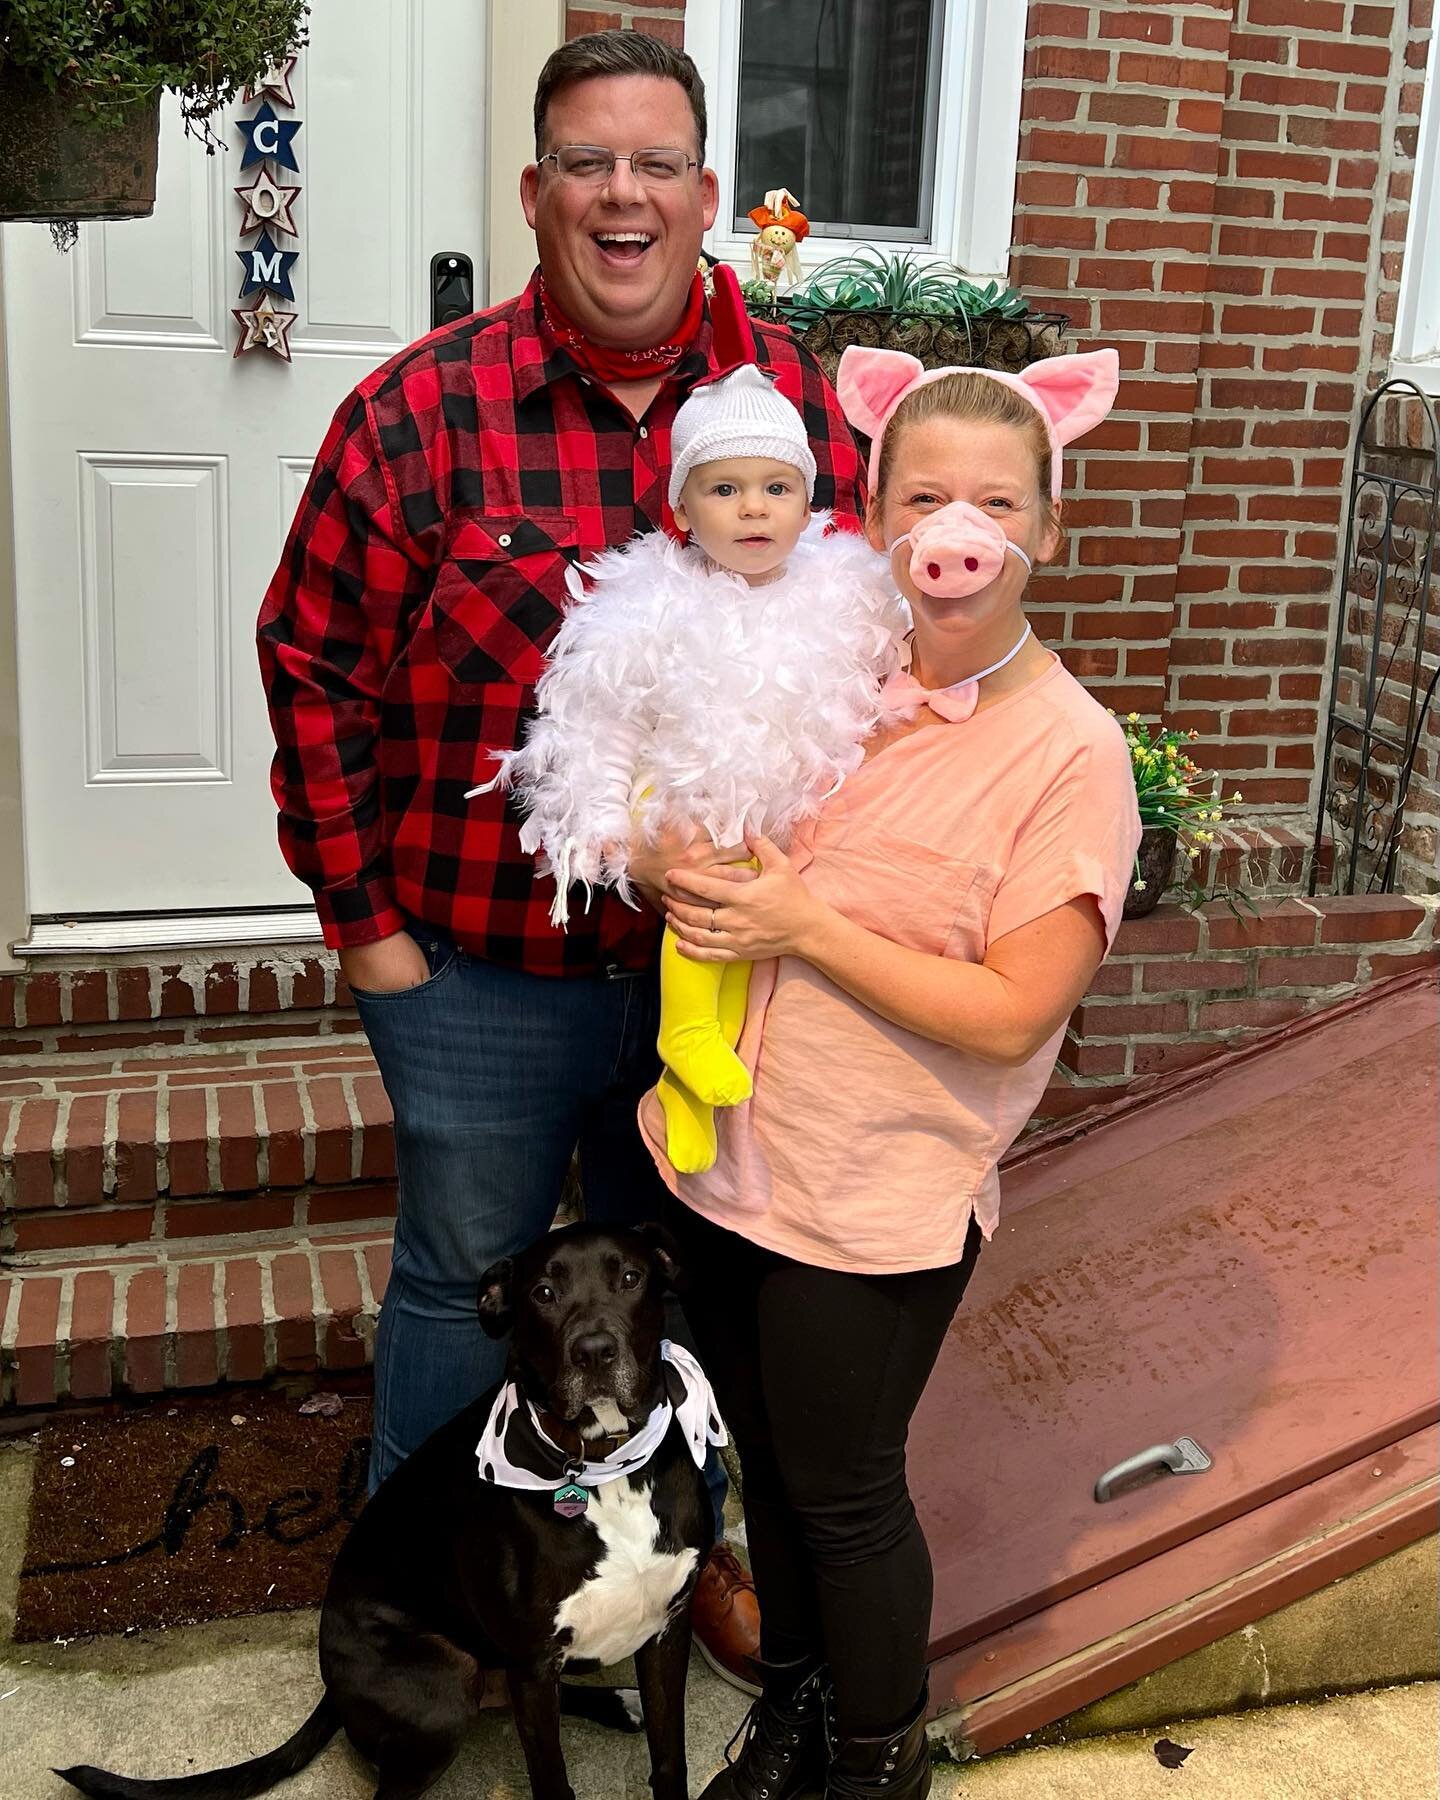 Happy Halloween from the Bishops!
👨&zwj;🌾🐷🐔🐮